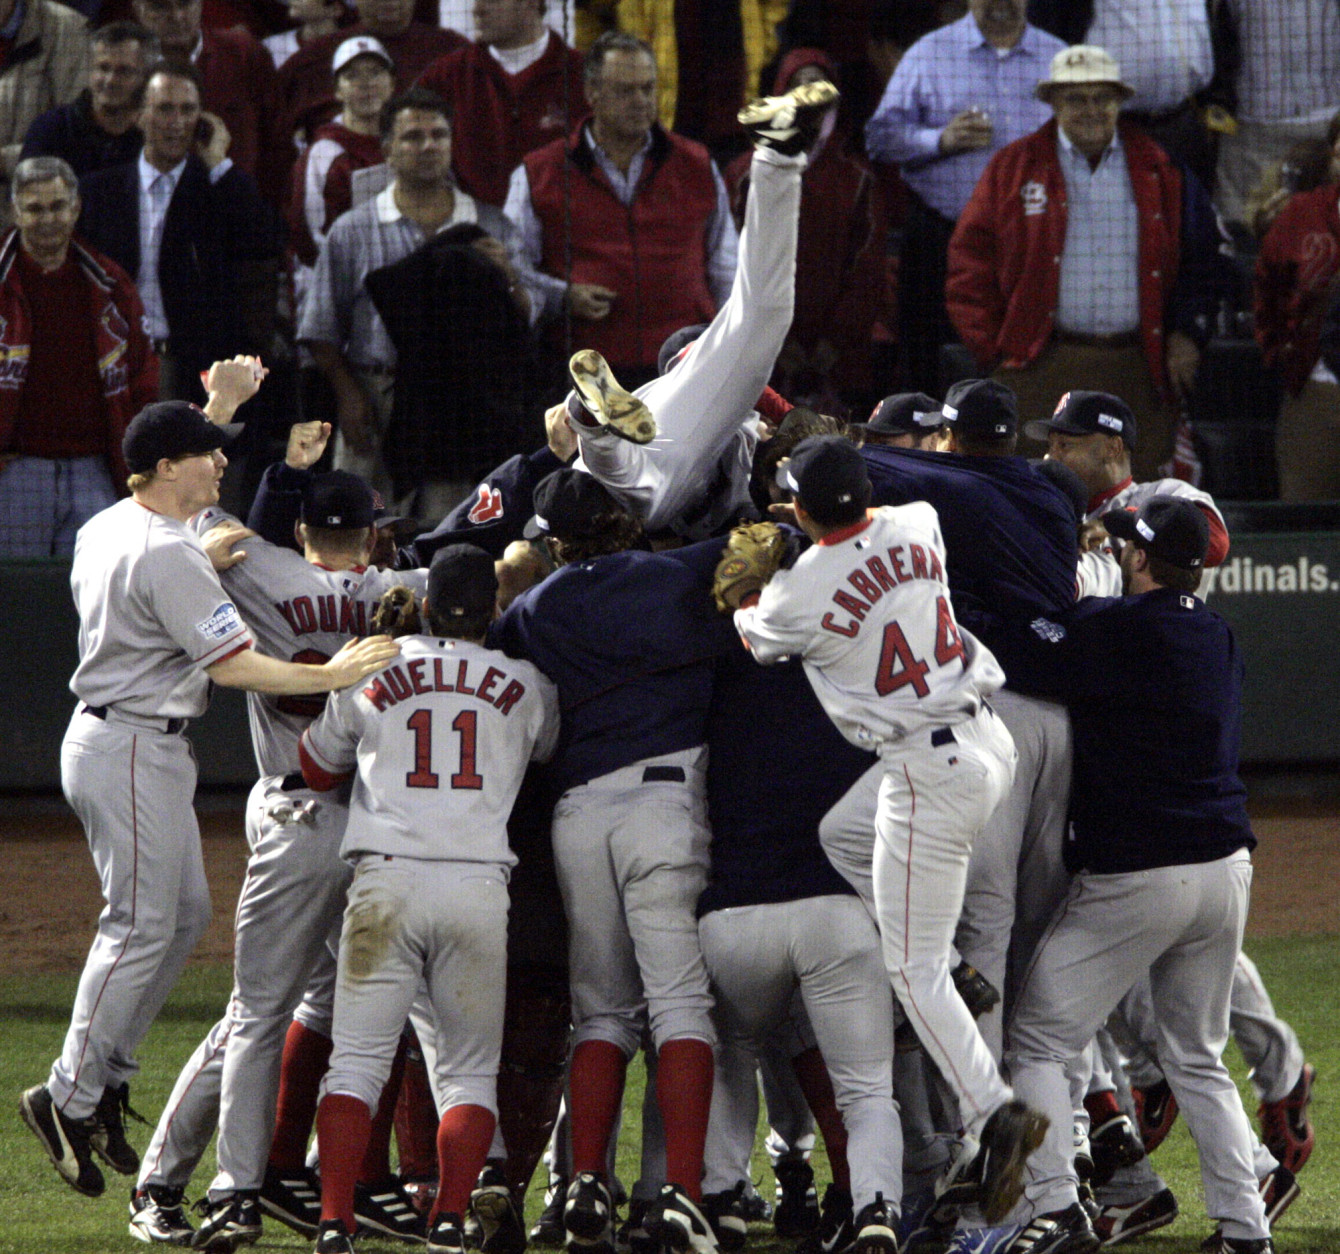 Boston Red Sox players celebrate after beating the St. Louis Cardinals 3-0 in Game 4 to sweep the World Series Wednesday, Oct. 27, 2004, in St. Louis. (AP Photo/Sue Ogrocki)